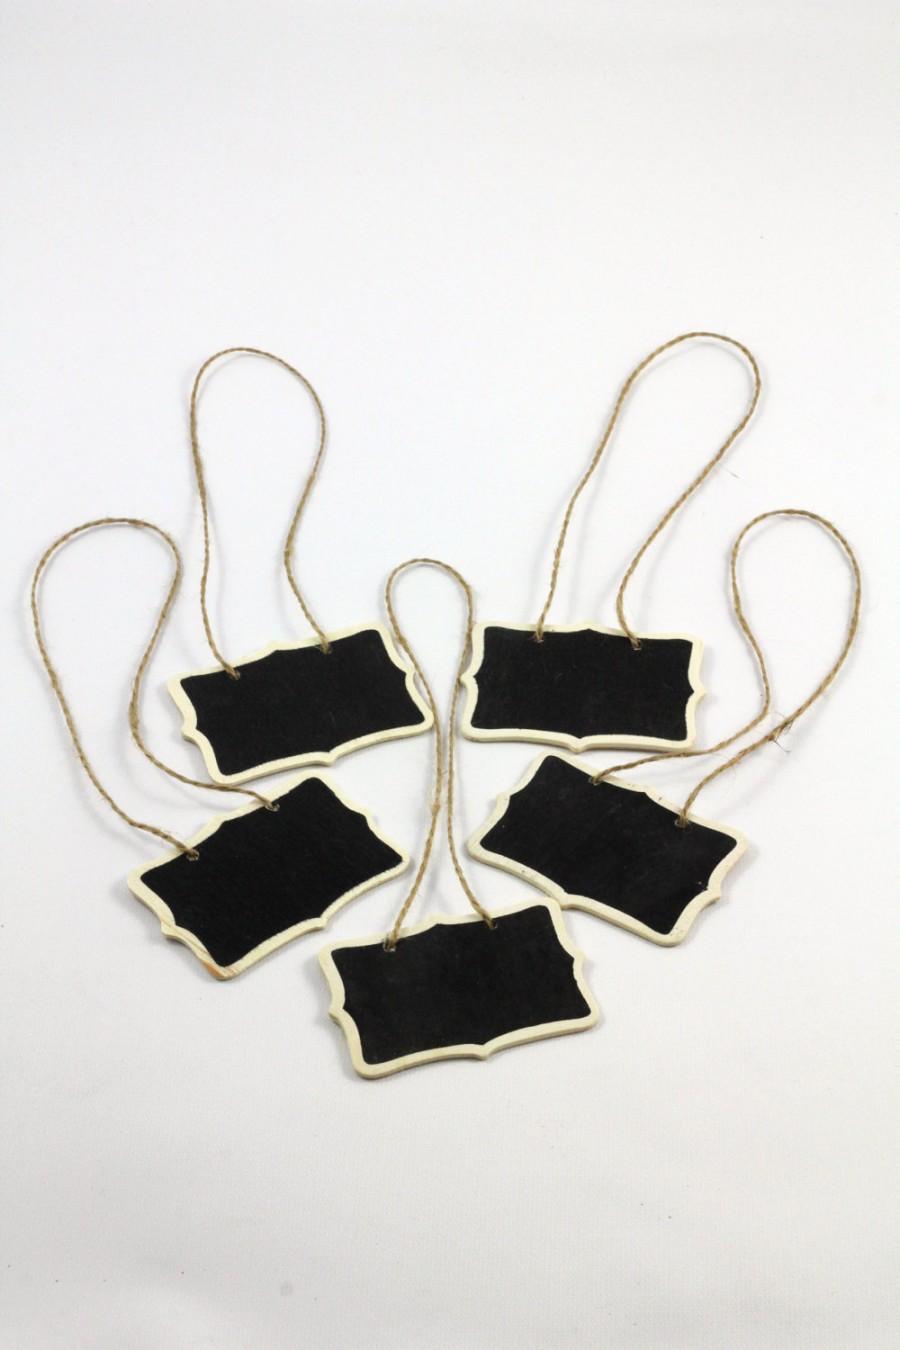 Wedding - SALE - Set of 5  - Mini Chalkboard Hanging Tags - Cottage Chic - Package embellishment  - Gift Tags Favor Tags - DearSeed